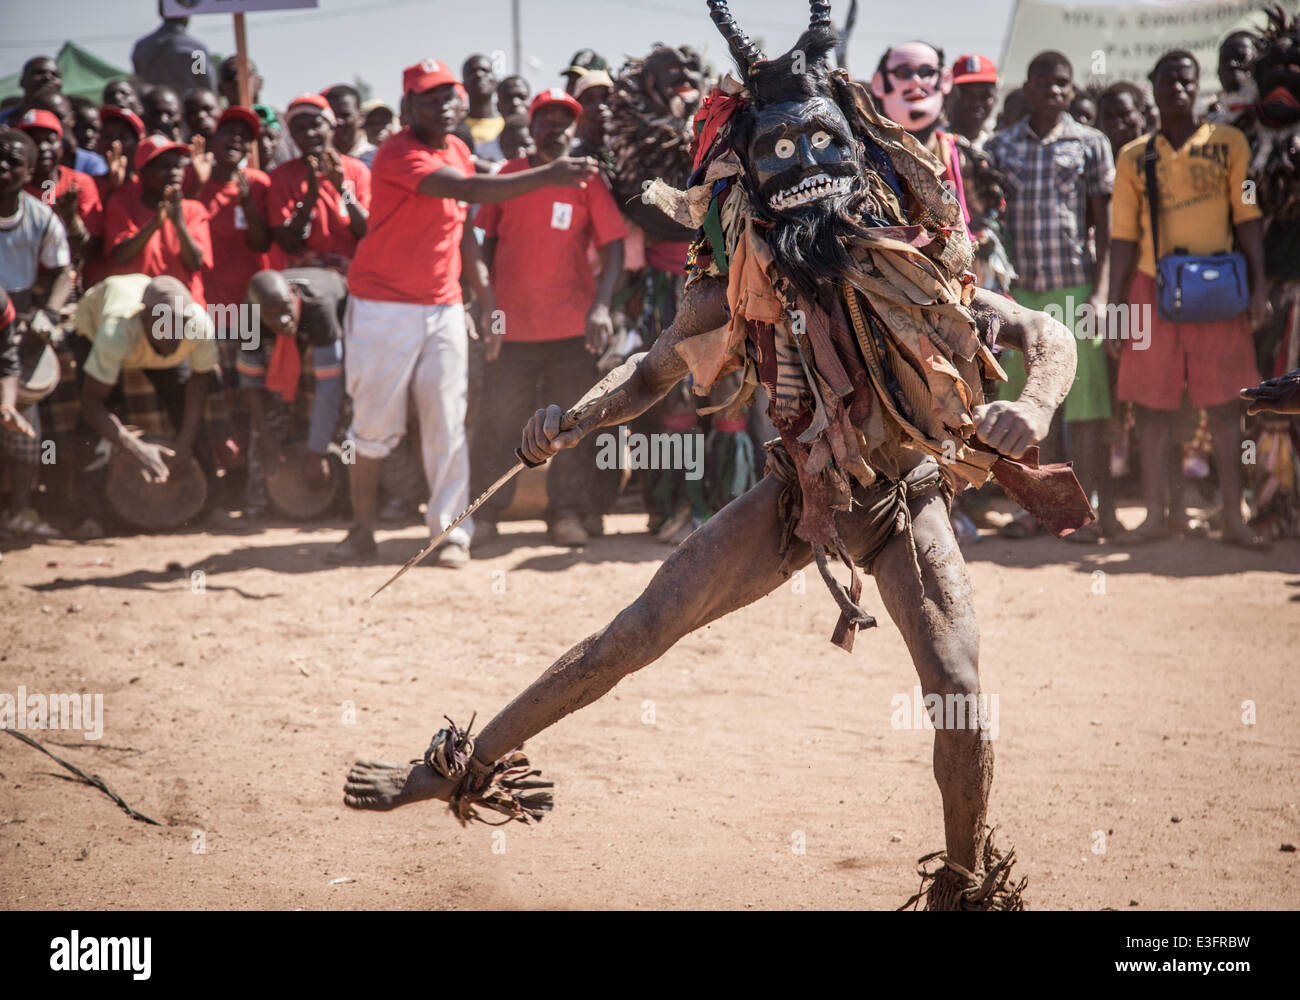 Maputo. 12th June, 2014. Photo taken on June 12, 2014 shows Nyau dancer perform in the northwestern province of Tete, Mozambique. Nyau masks are worn by only male members of the society and represent male knowledge, and are understood to be spirits of the dead during performance. Nyau is an ethnic society in western Mozambique, central and southern Malawi, eastern Zambia, and areas where Malawians migrated in Zimbabwe. © Mauro Vombe/Xinhua/Alamy Live News Stock Photo